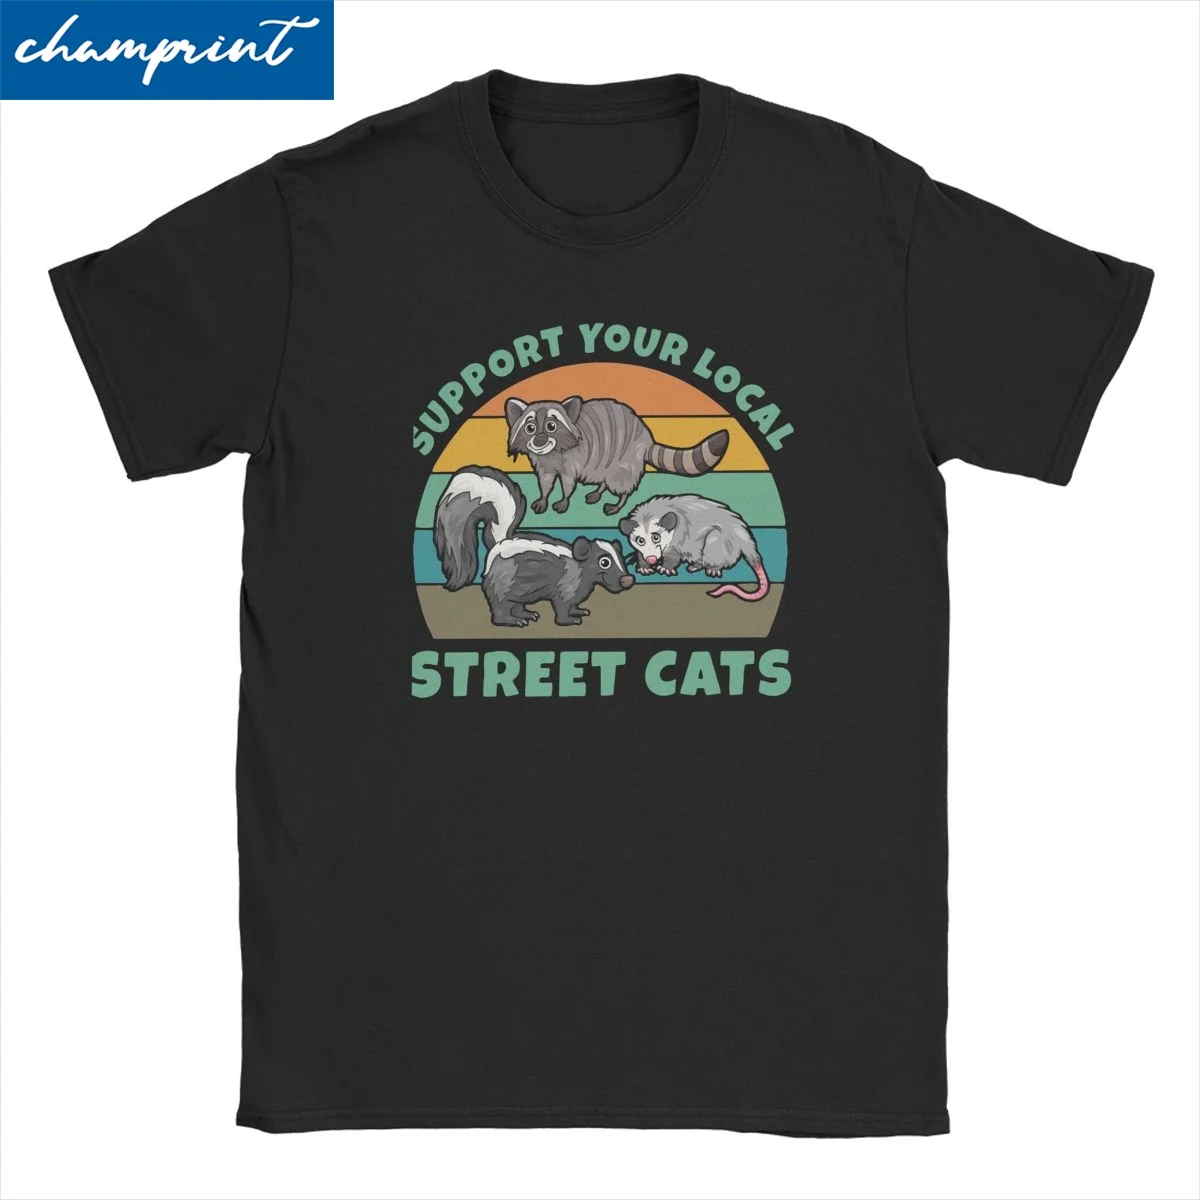 

Support Your Local Street Cats Retro Possum Skunk Raccoon T Shirts Men Women's Funny T-Shirt Animal Lover Tee Shirt Plus Size